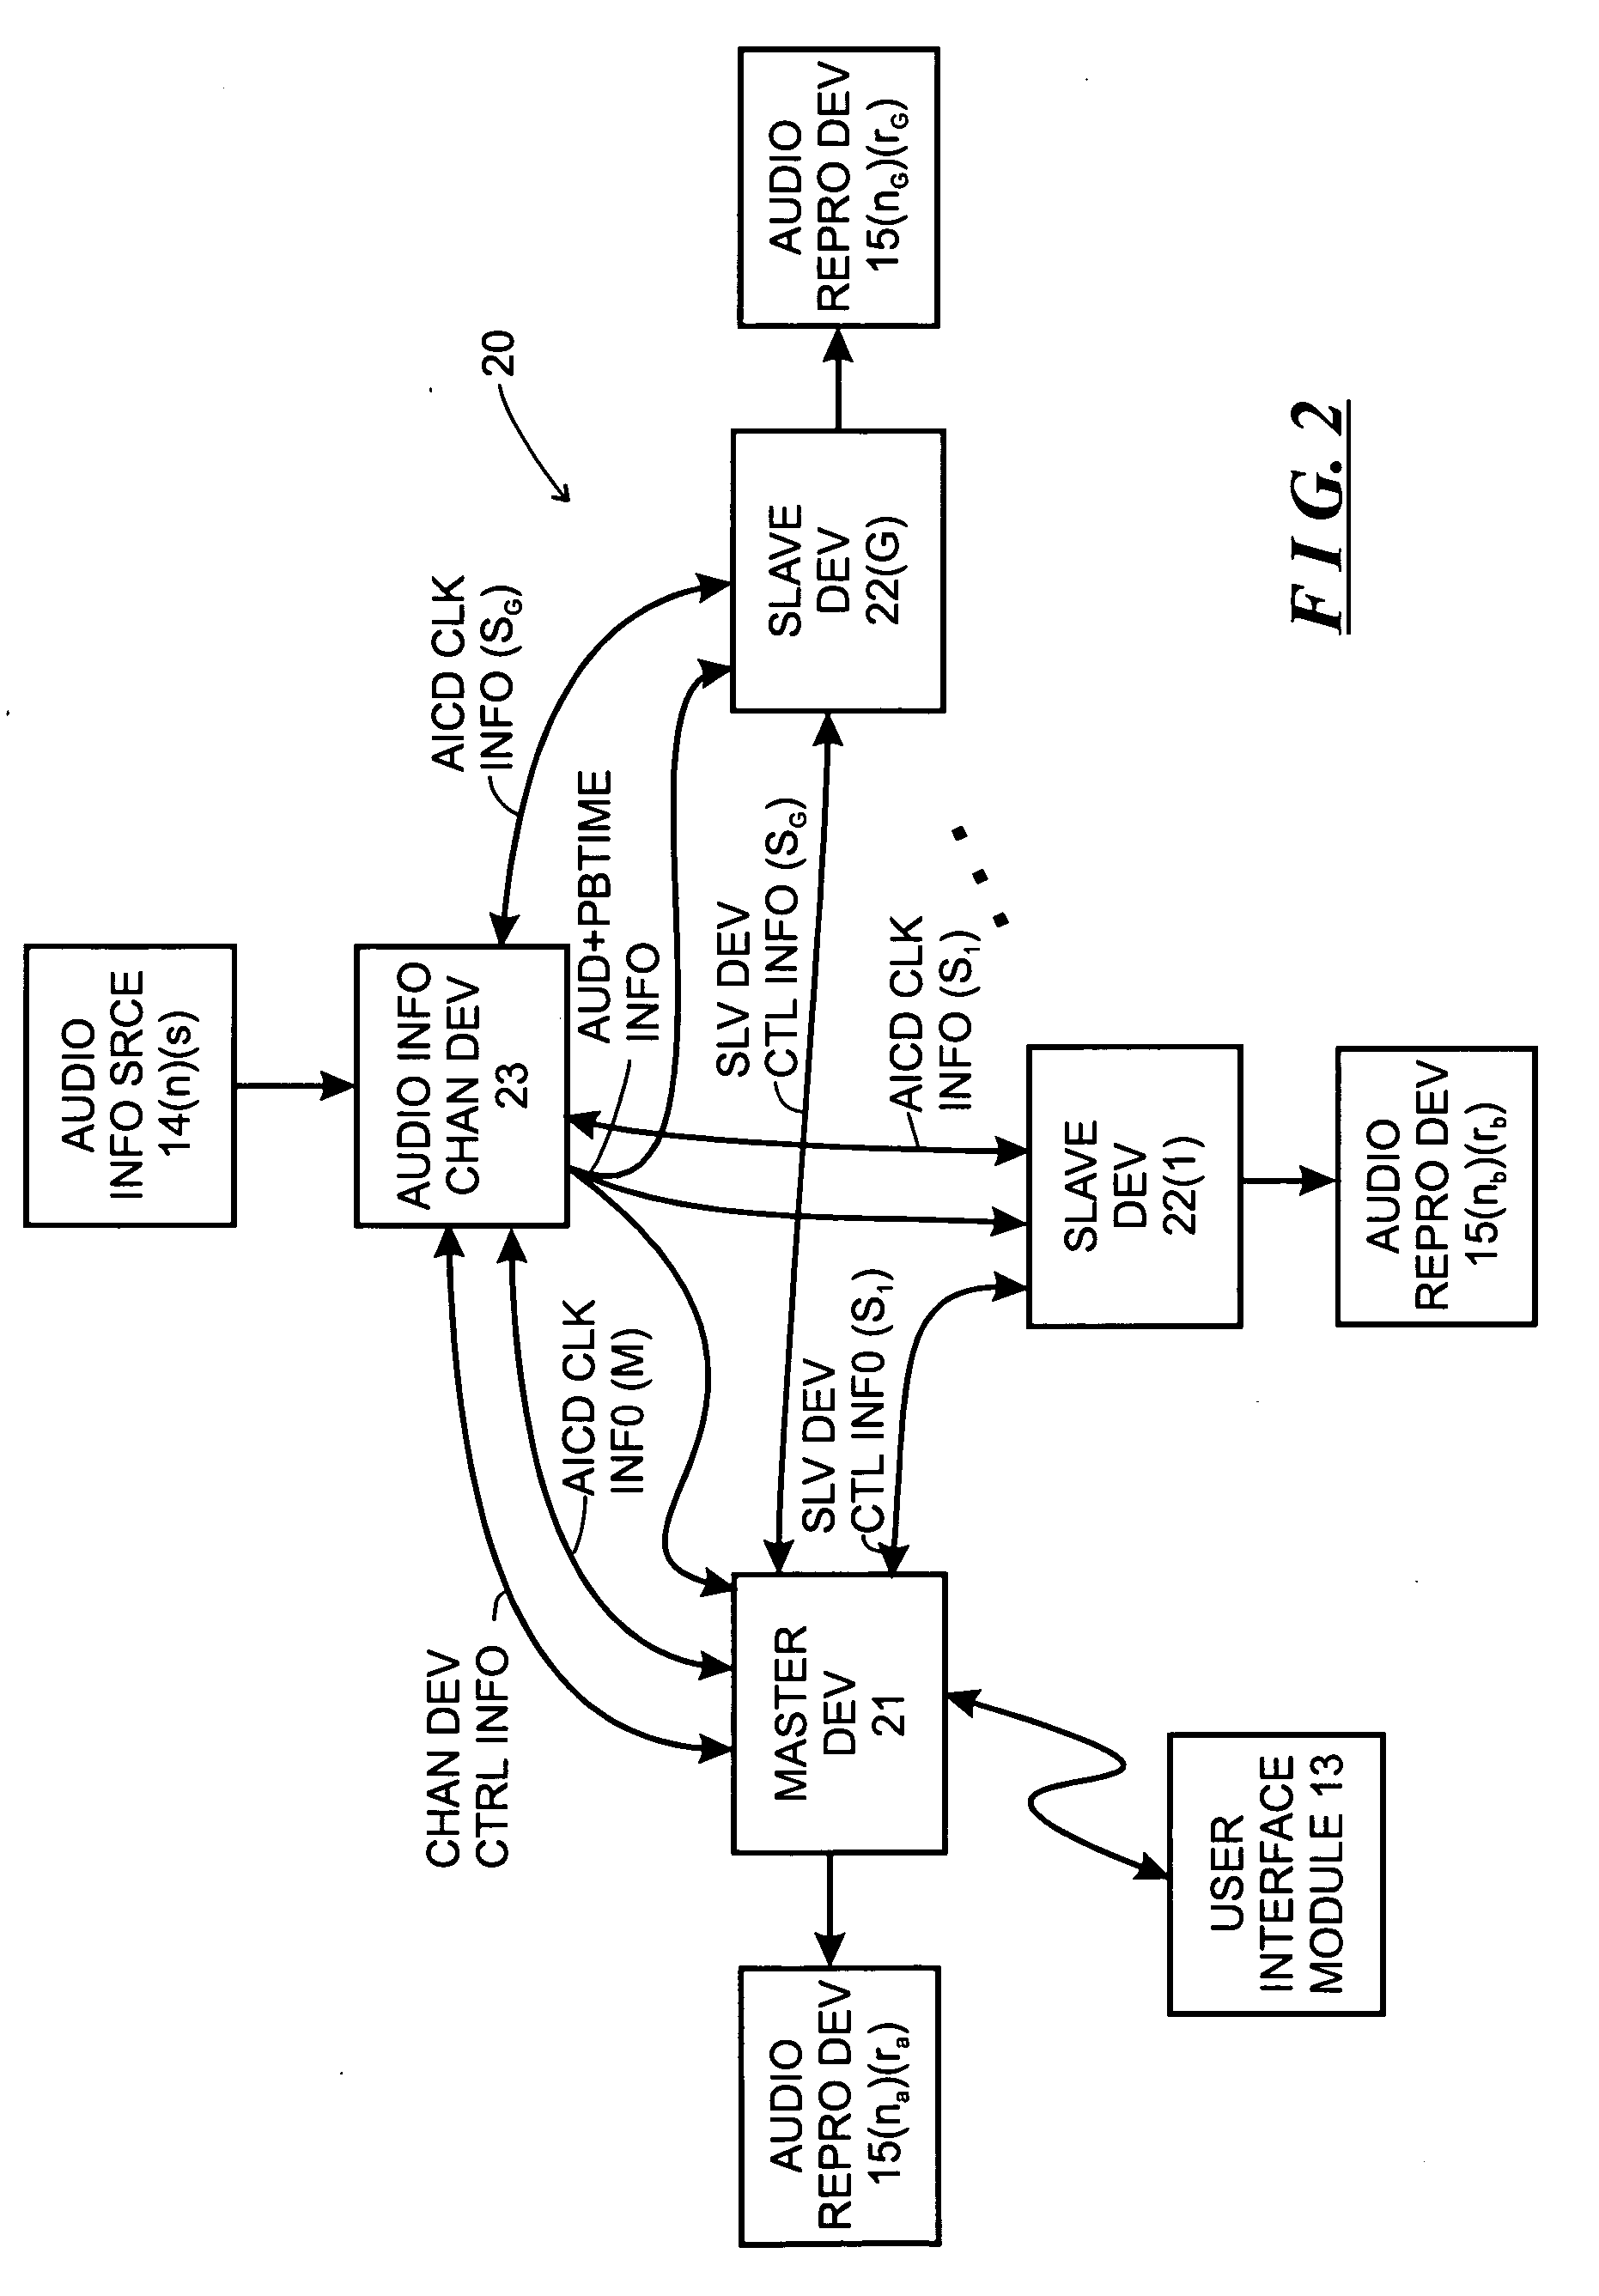 System and method for synchronizing operations among a plurality of independently clocked digital data processing devices